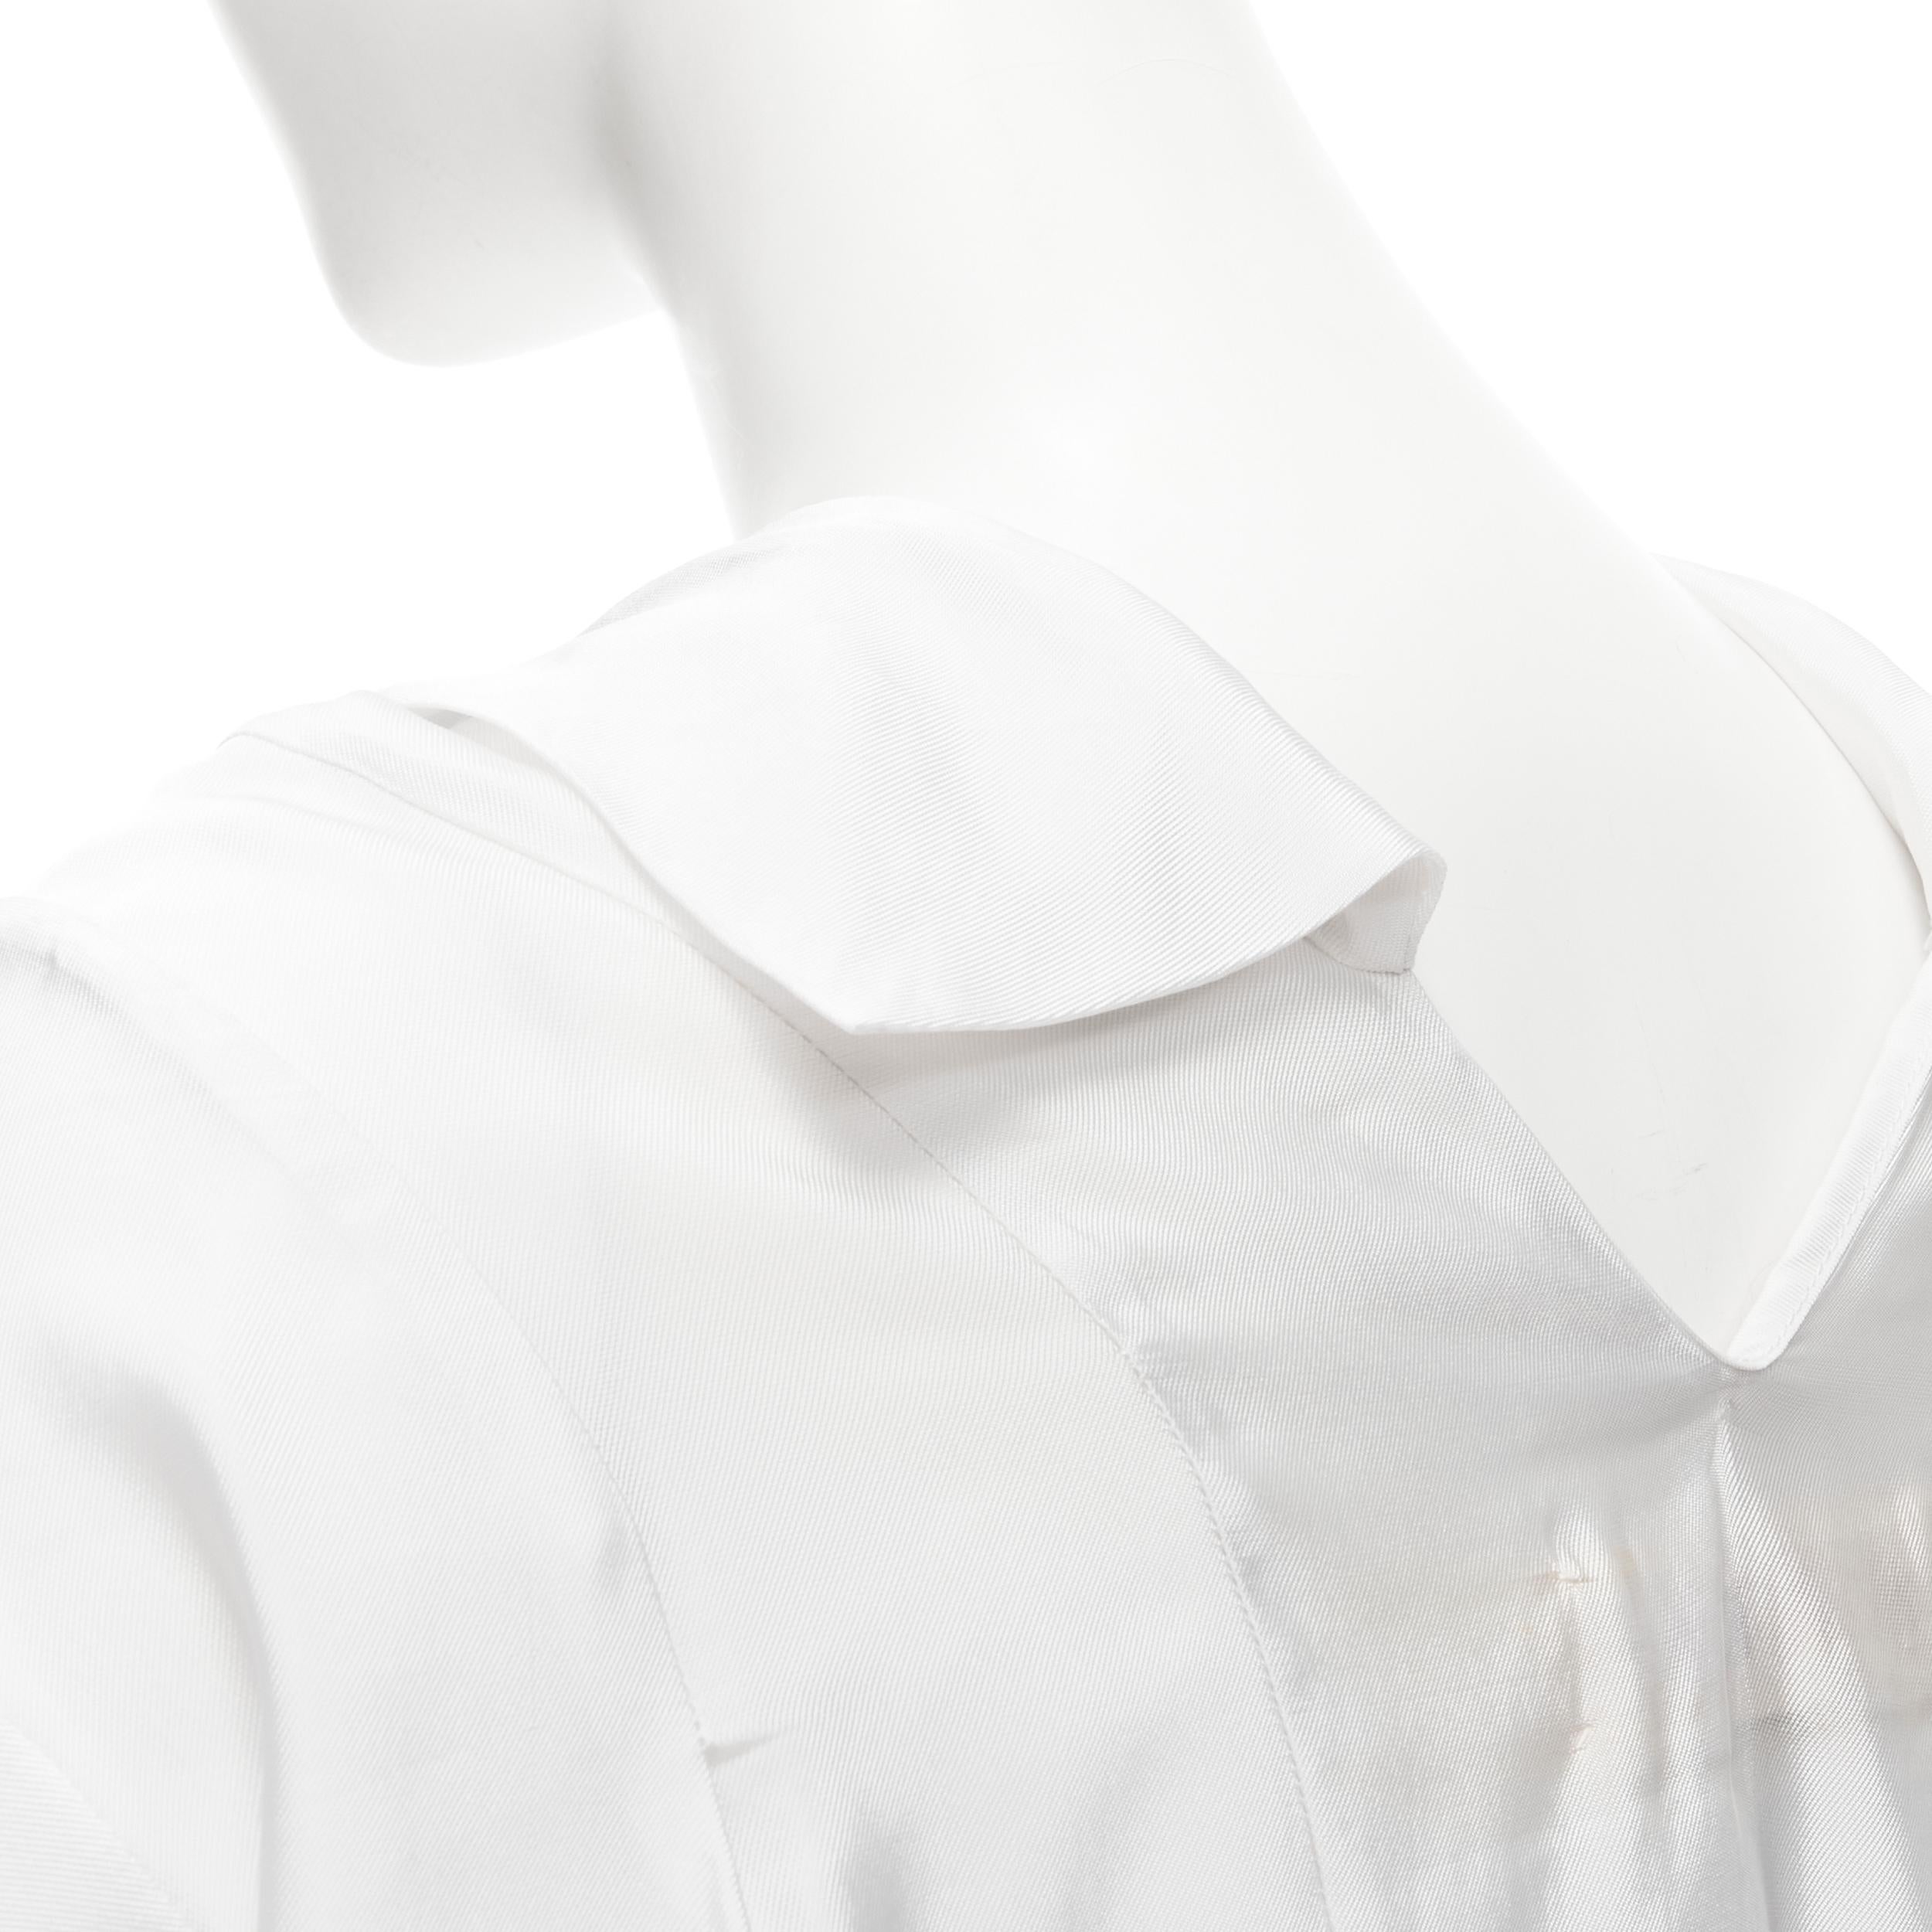 MARNI white viscose cowl neck curved seam slit pocket top IT38 XS 
Reference: CELG/A00136 
Brand: Marni 
Material: Viscose 
Color: White 
Pattern: Solid 
Extra Detail: Slit front pockets. 
Made in: Italy 

CONDITION: 
Condition: Good, this item was